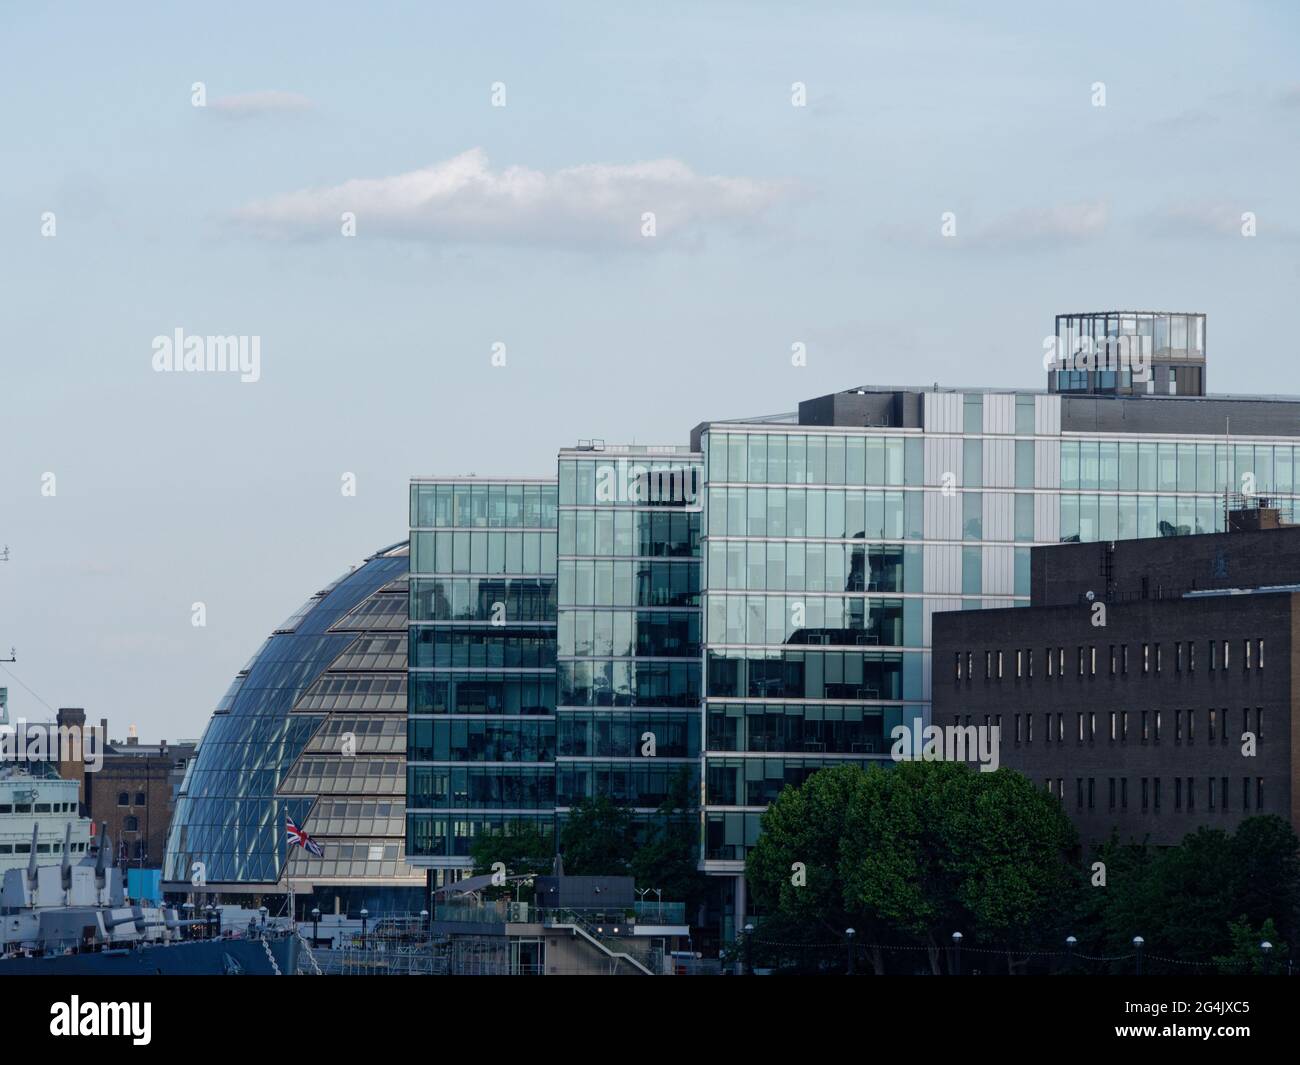 London, Greater London, England - June 12 2021: Modern building beside City Hall in Southwark with guns of ex warship HMS Belfast on the left. Stock Photo